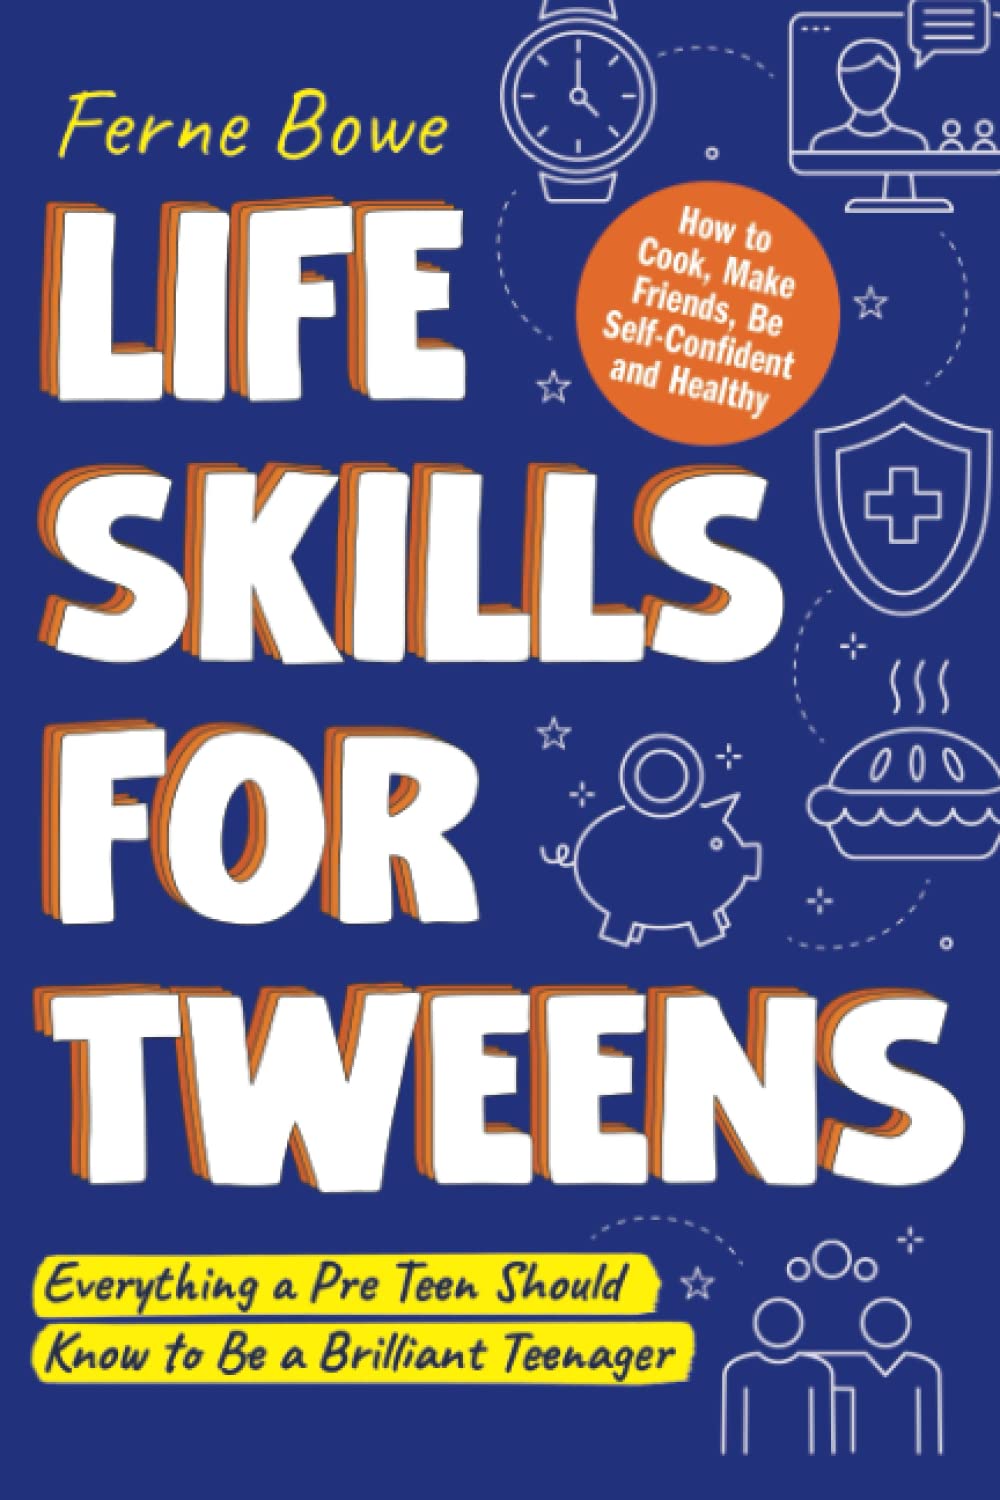 Life Skills for Tweens—25 Best New Books for 7th Graders